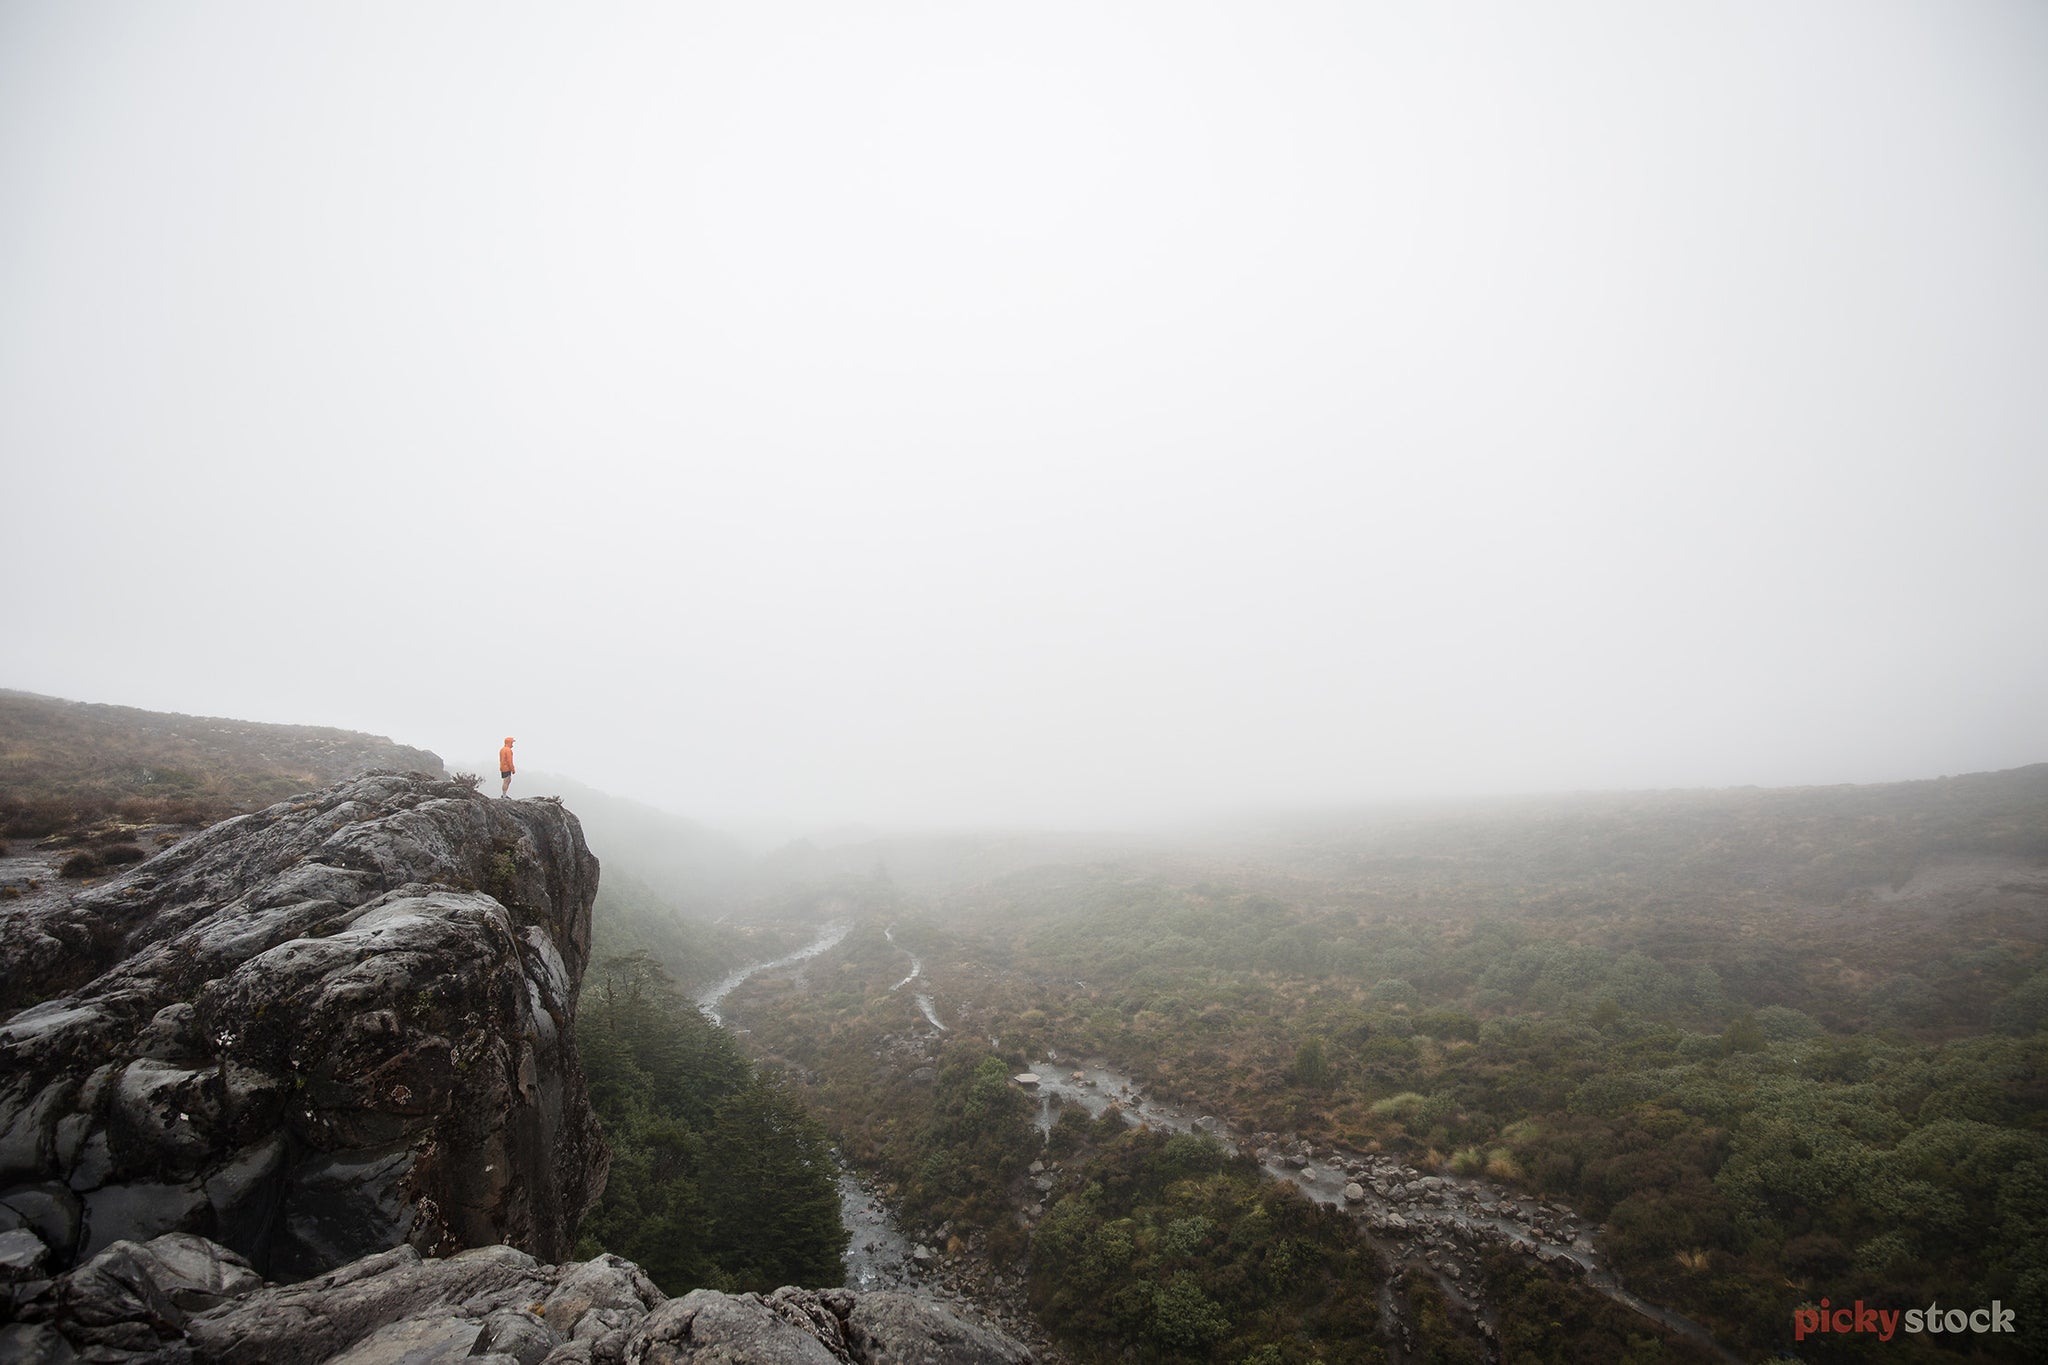 Walker looks out on peak over misty grey gully in the Tongariro National Park region. 